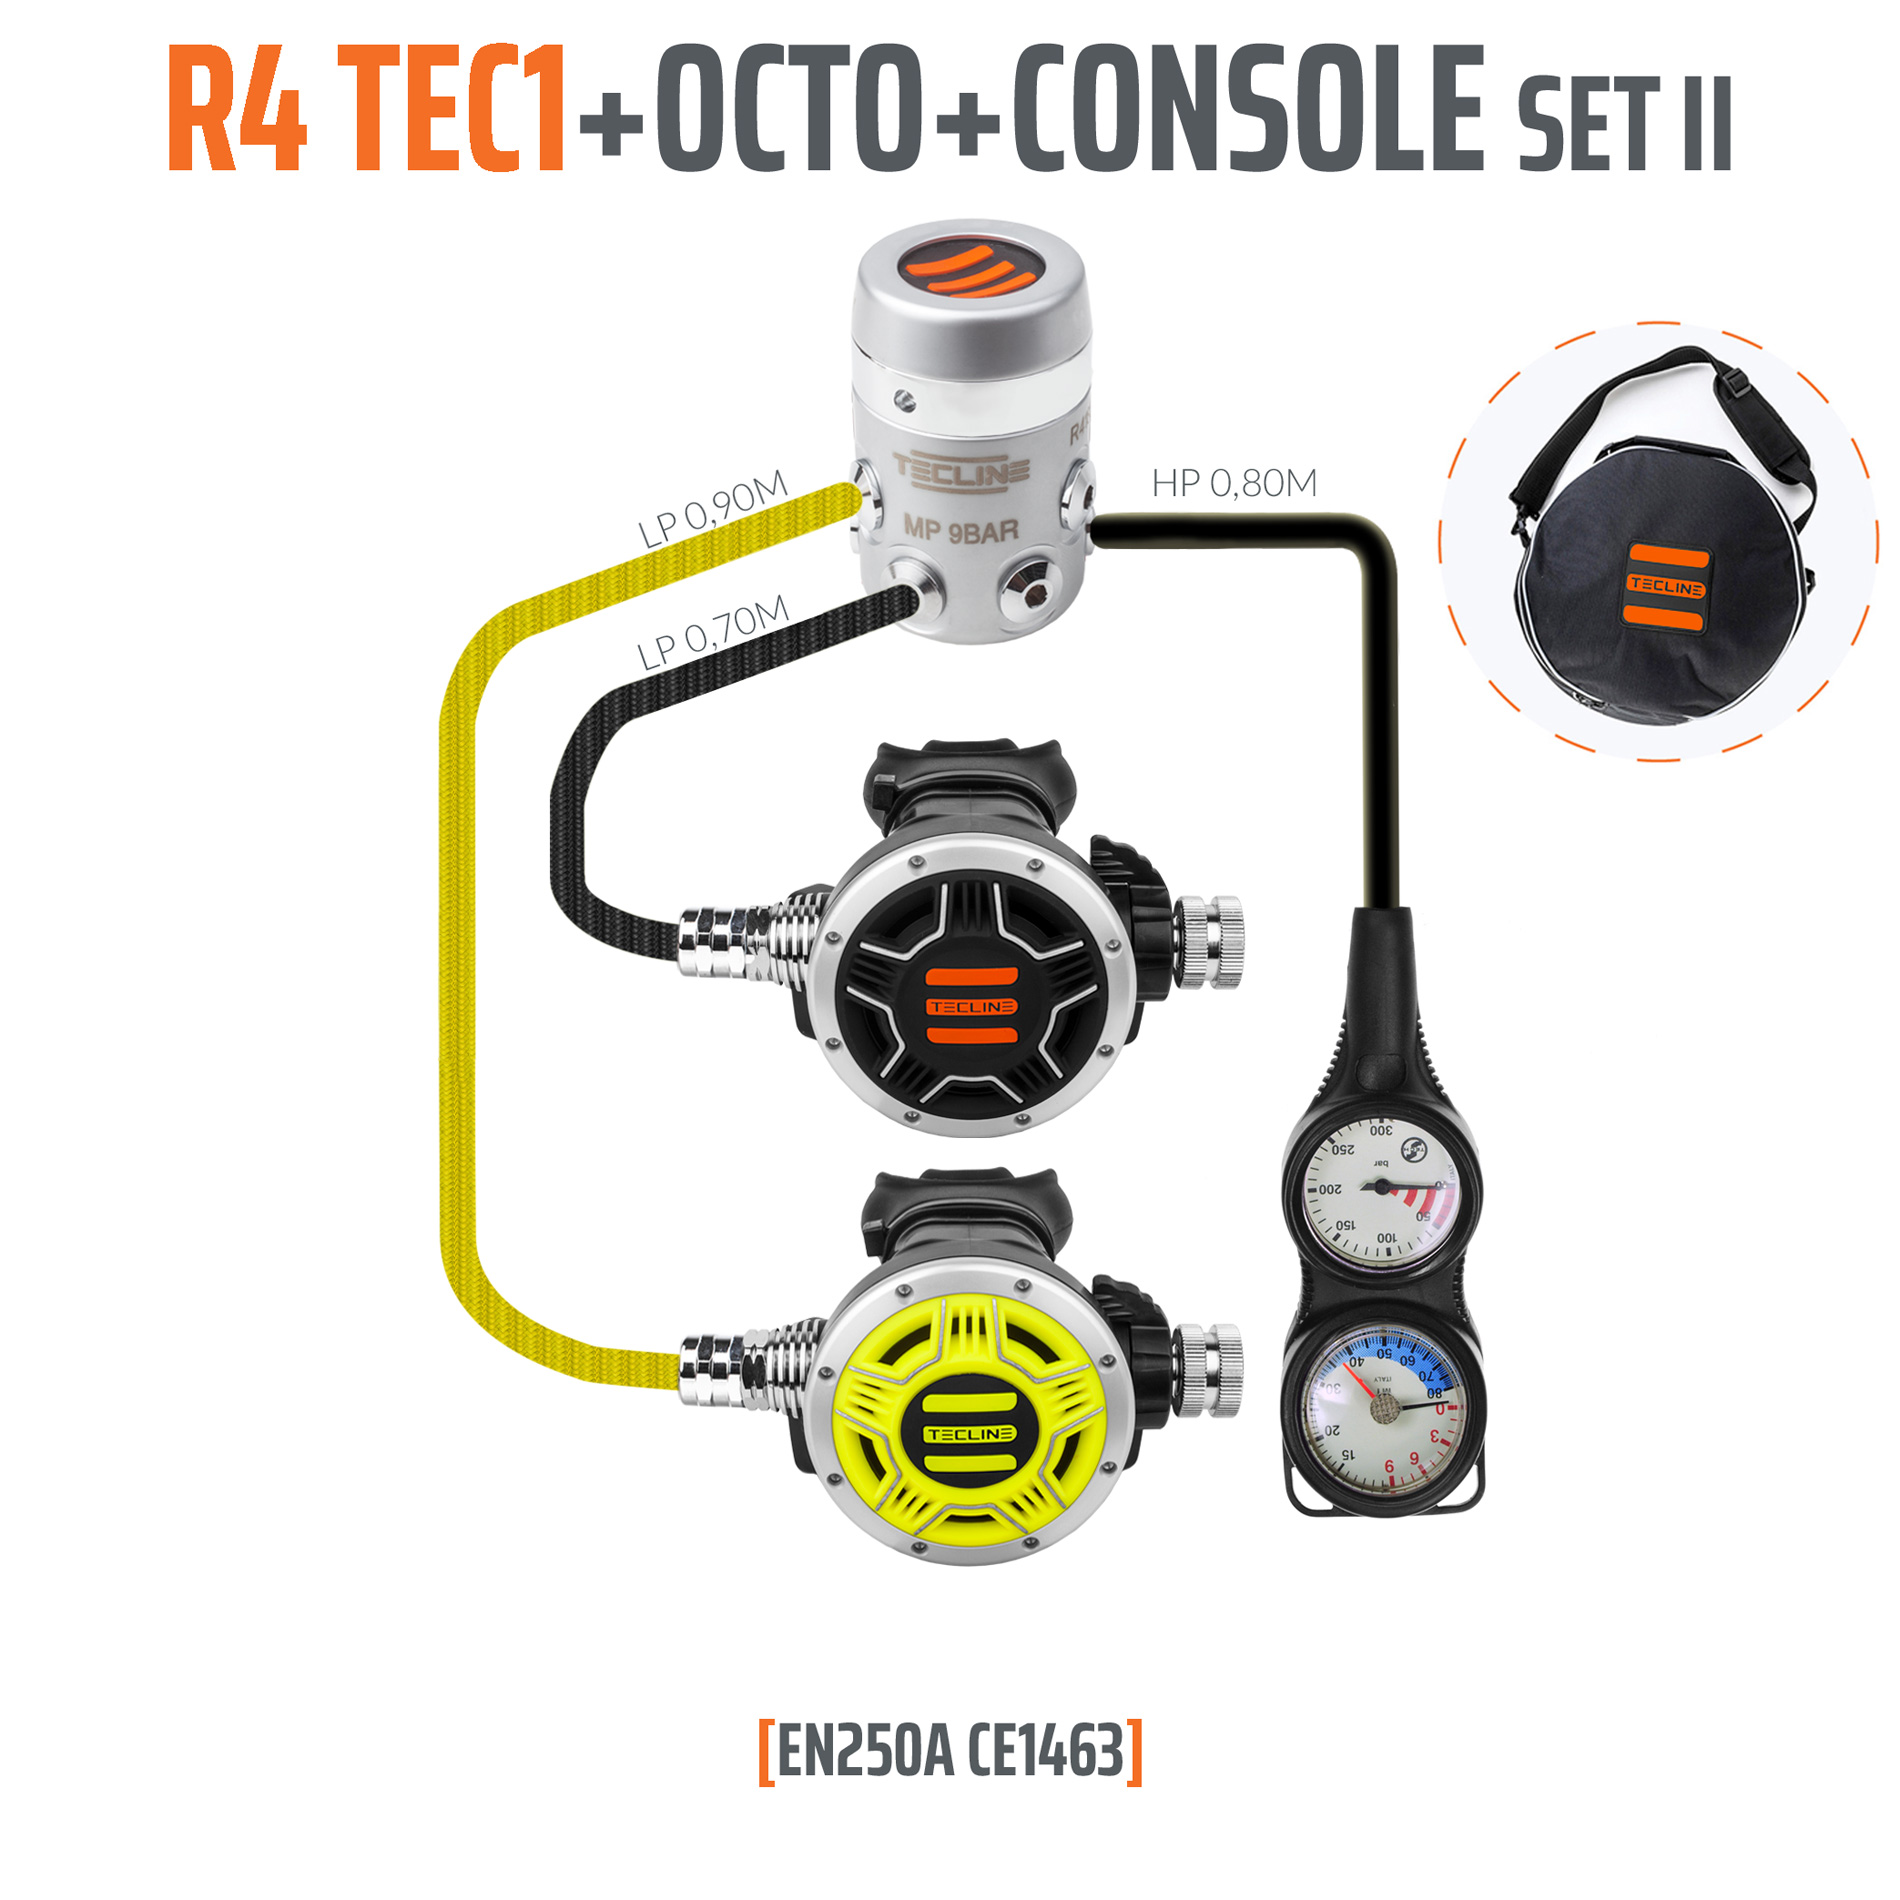 Tecline Regulator R4 TEC1 set II with octo and 2 elements console – EN250A